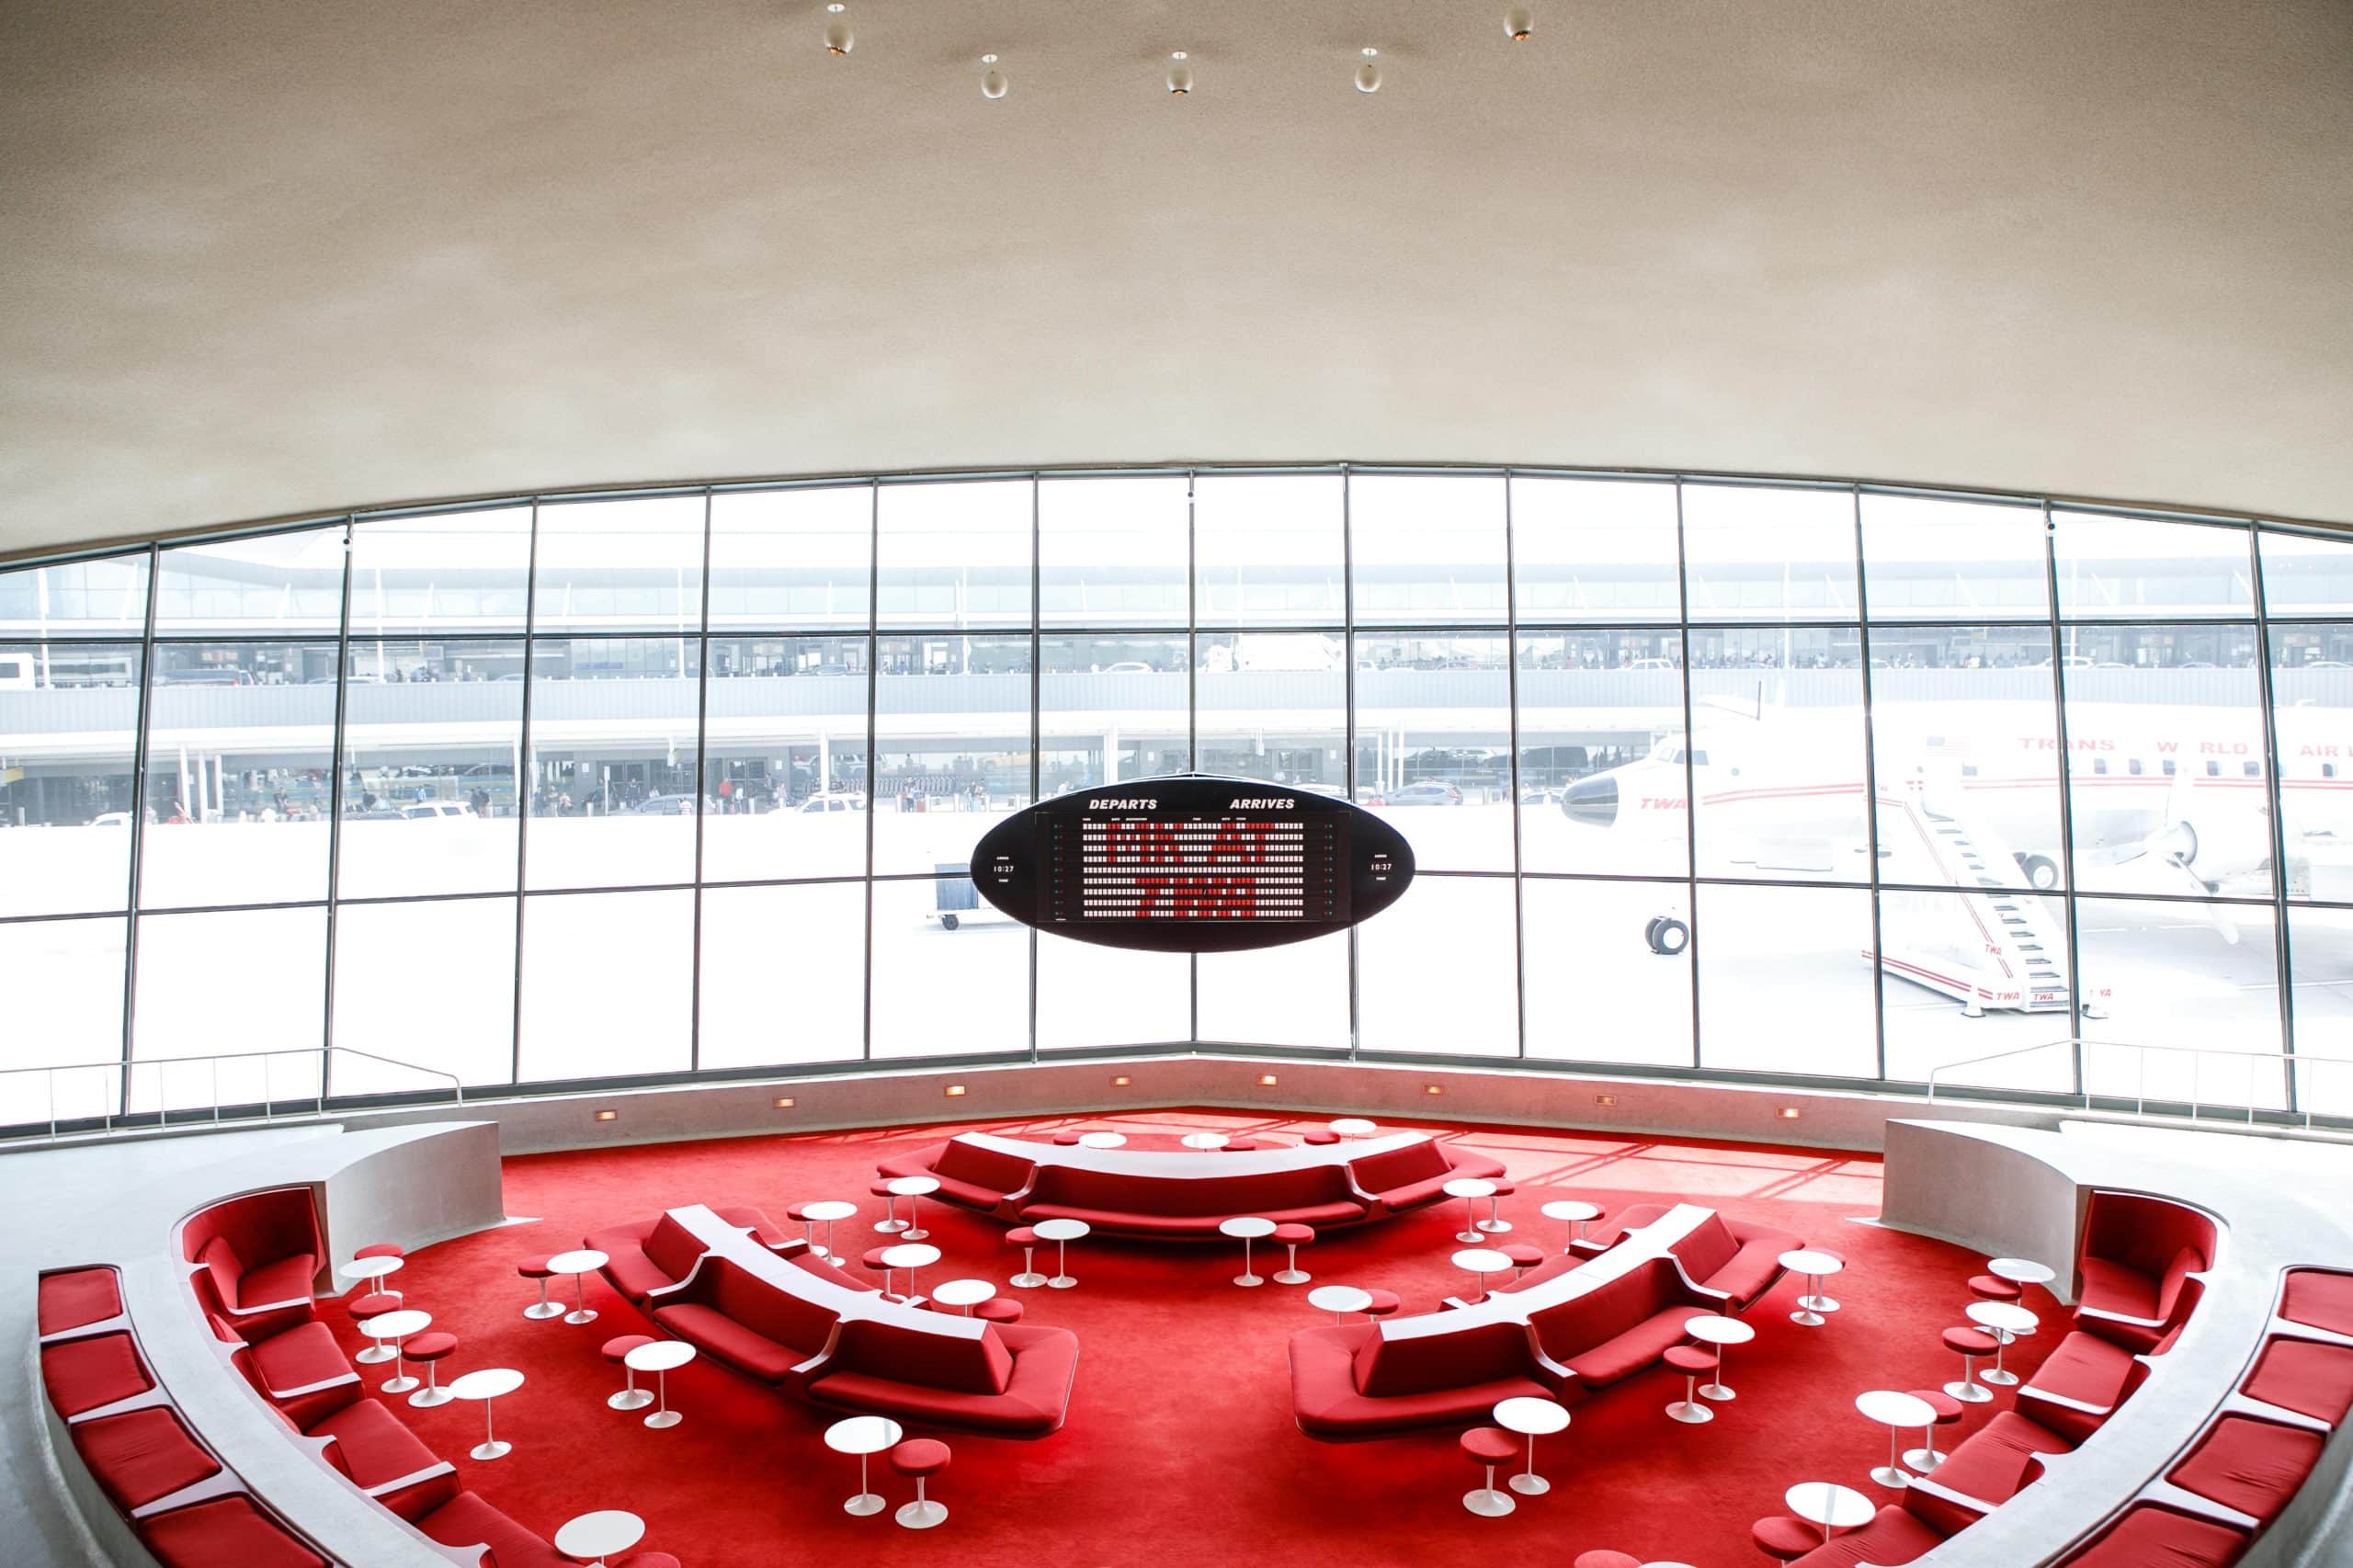 One of the seating and eating areas at the TWA Hotel.